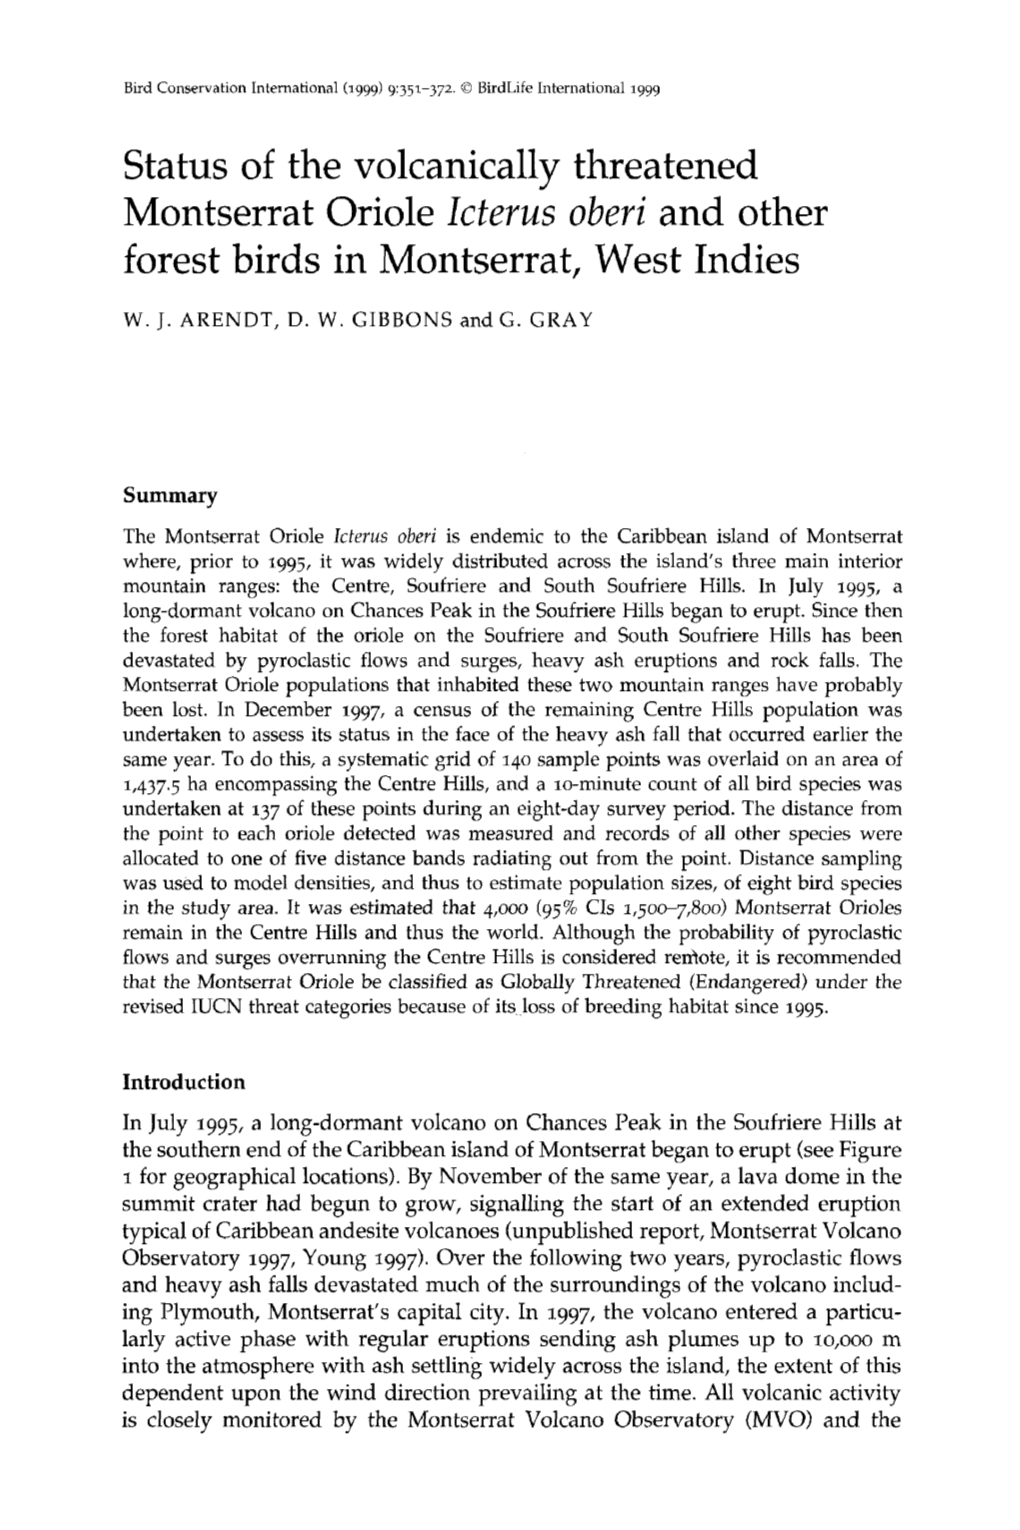 Status of the Volcanically Threatened Montserrat Oriole Icterus Oberi and Other Forest Birds in Montserrat, West Indies